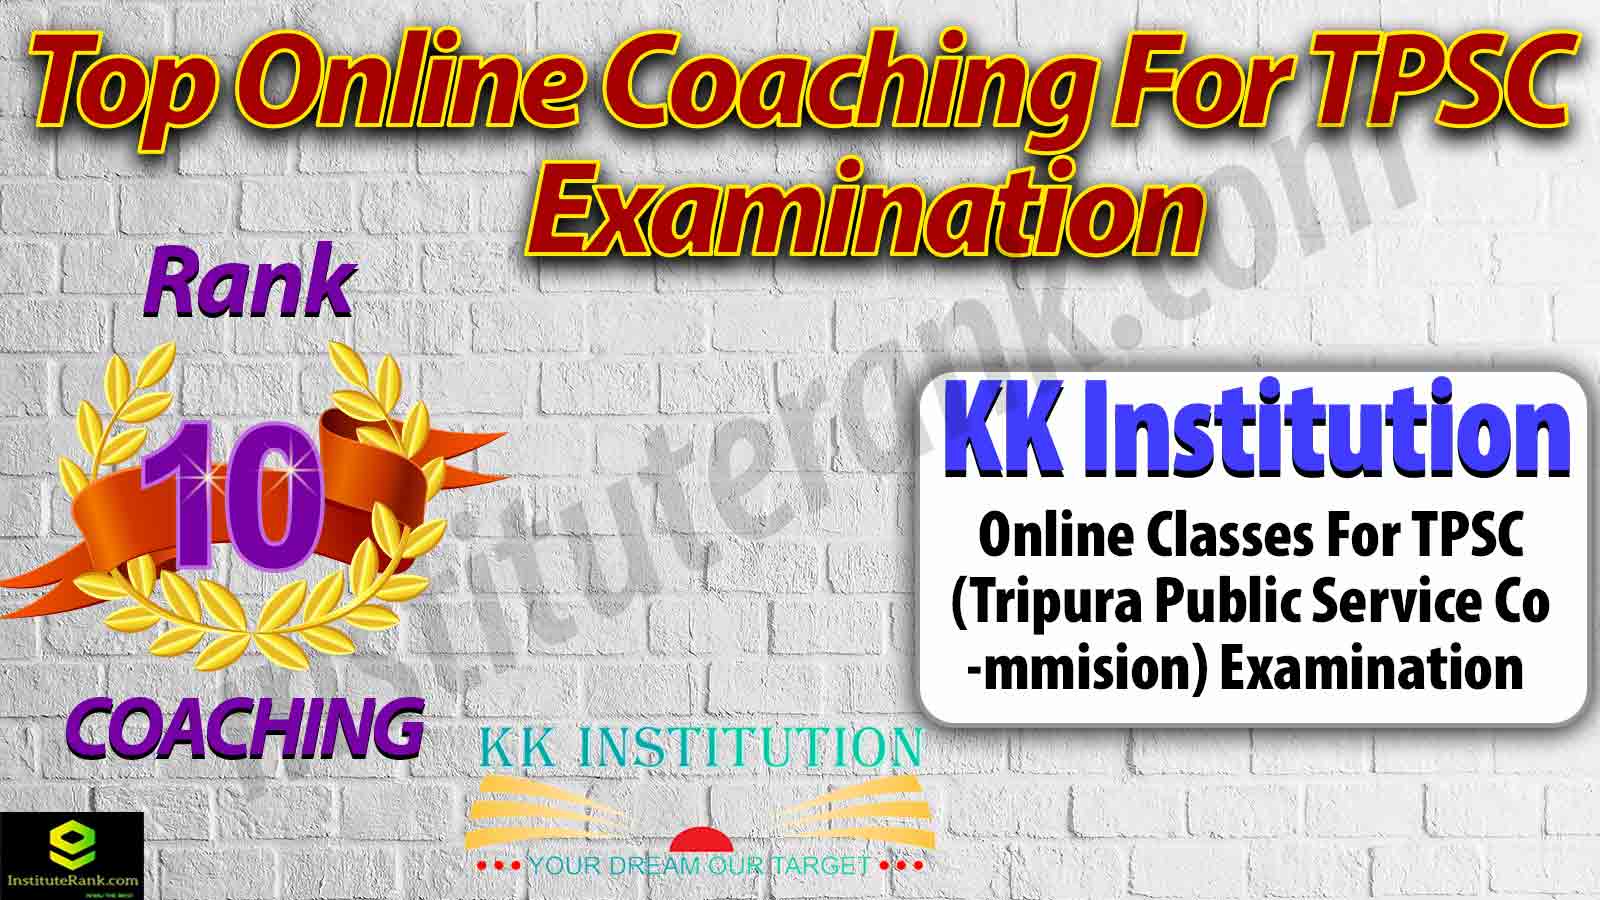 Online Preparation for TPSC Examination